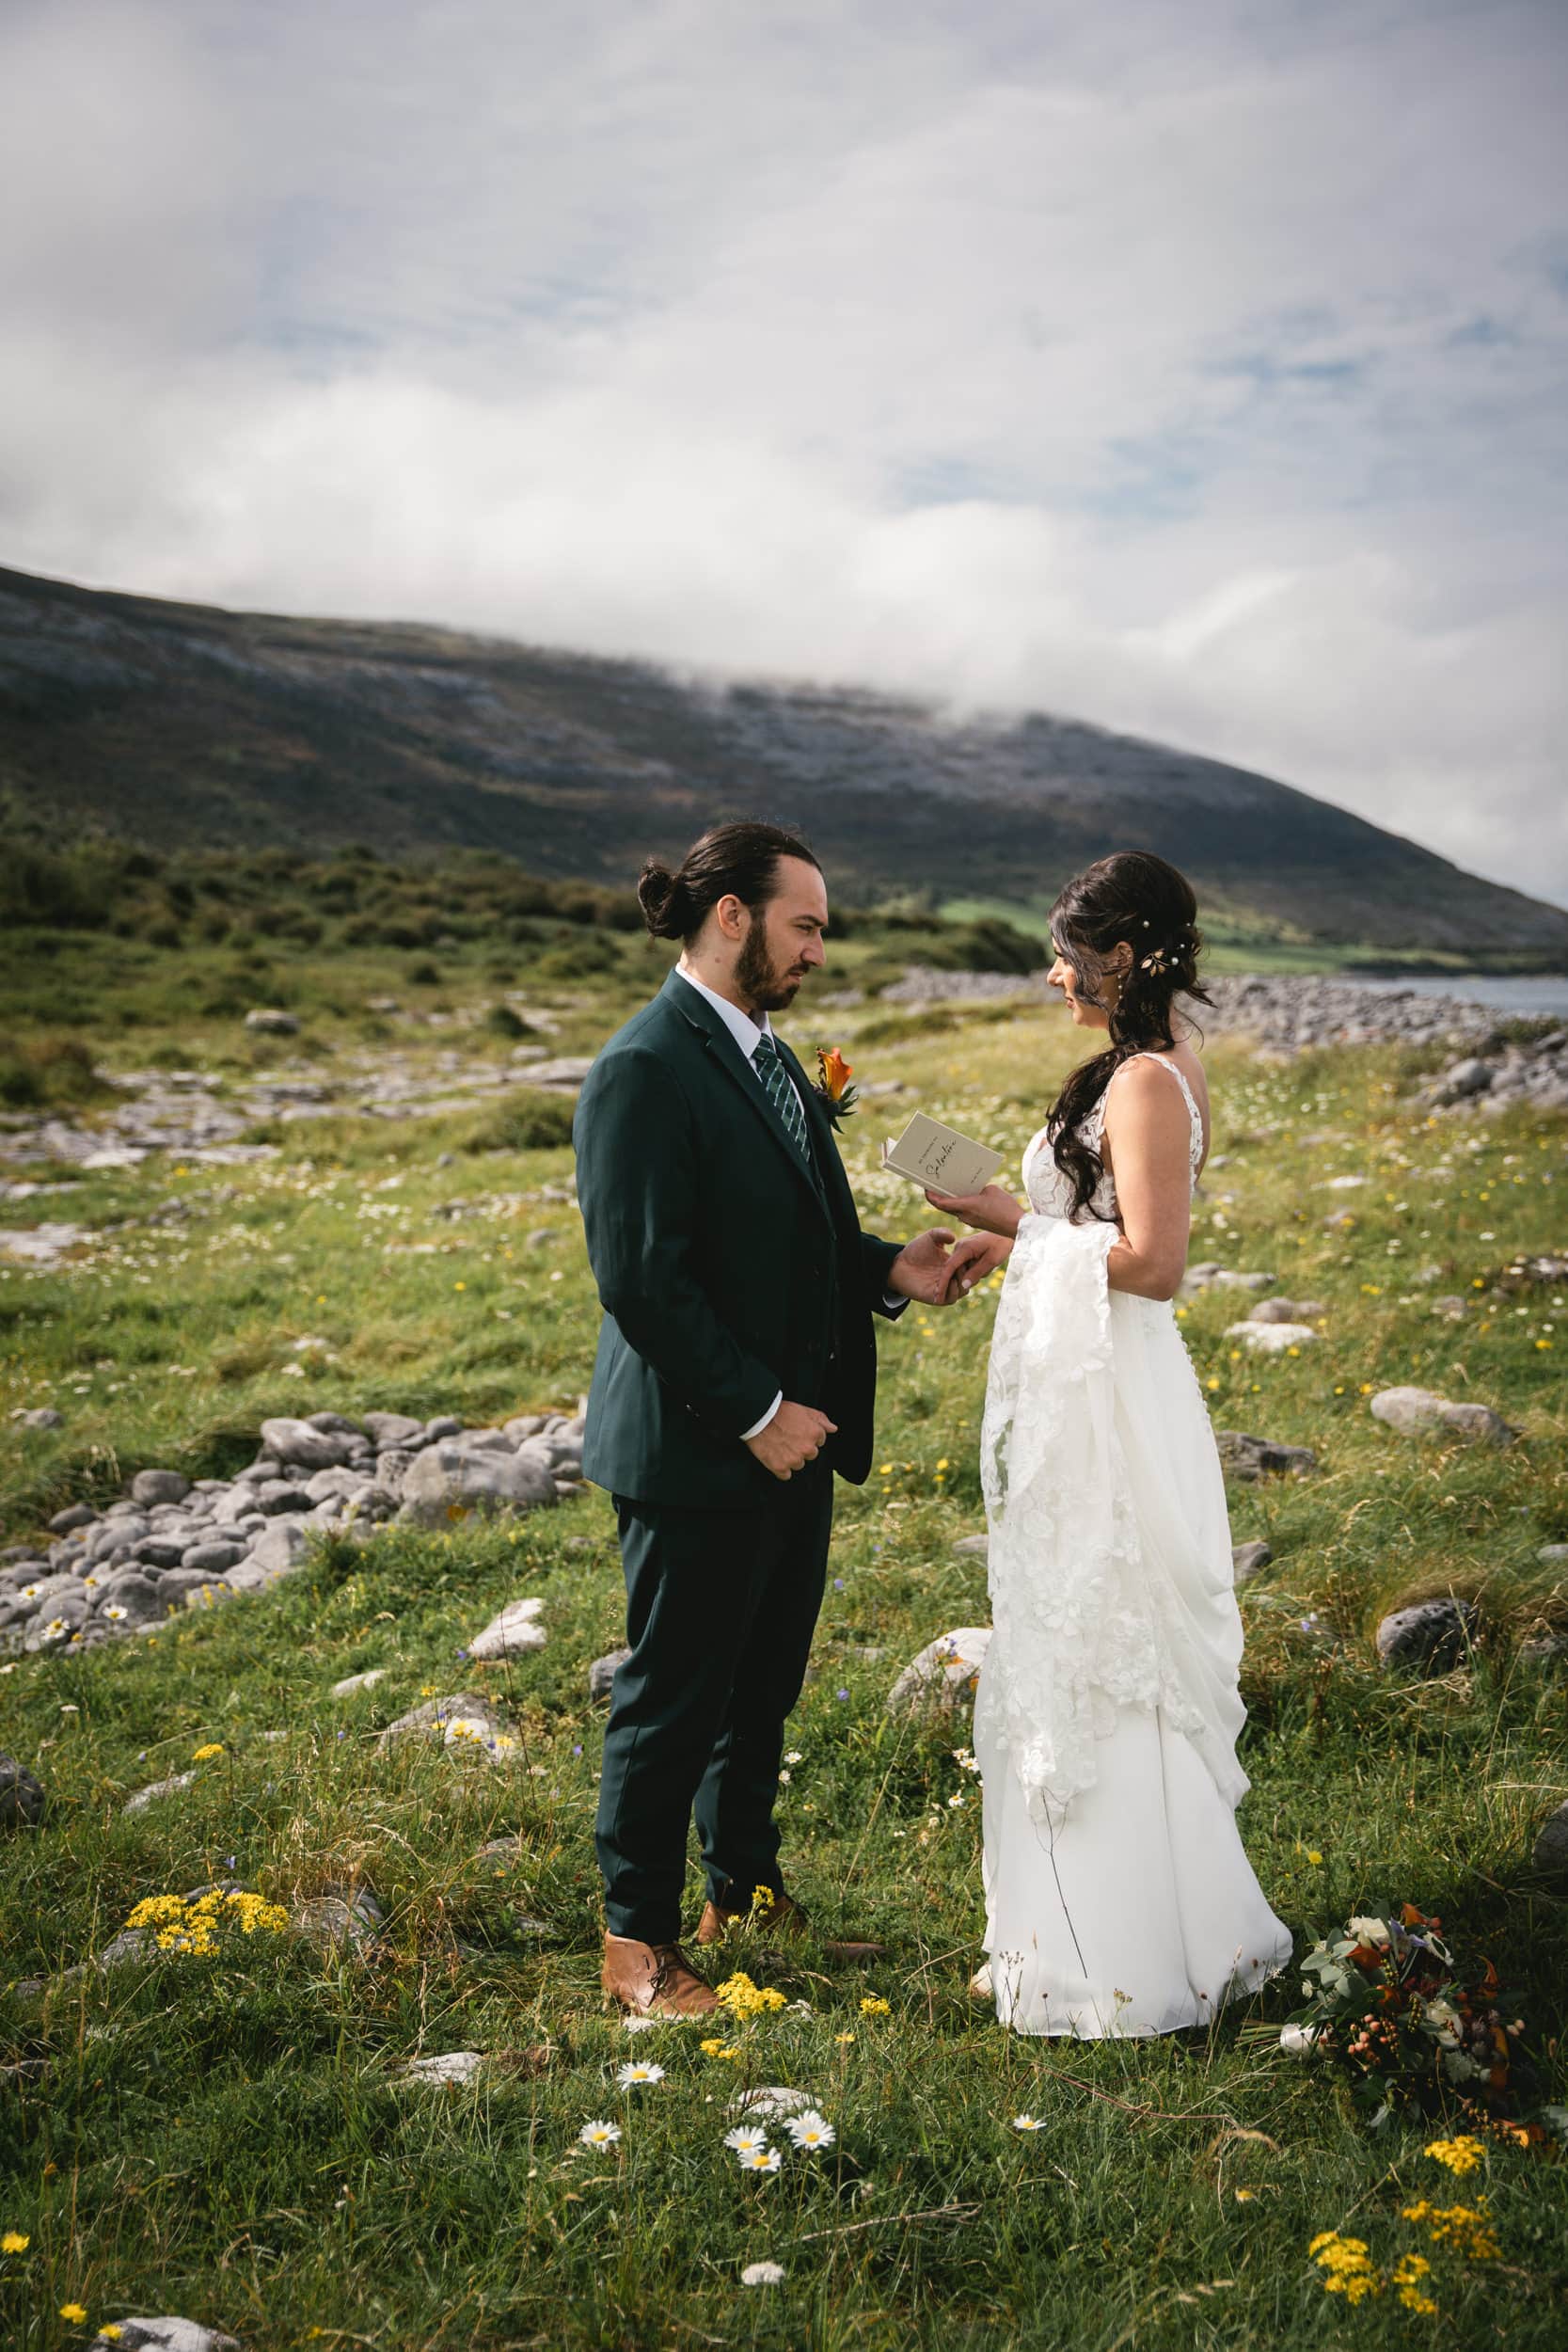 Cliffside love: Jesse and Sal's Irish elopement on the rugged coast.